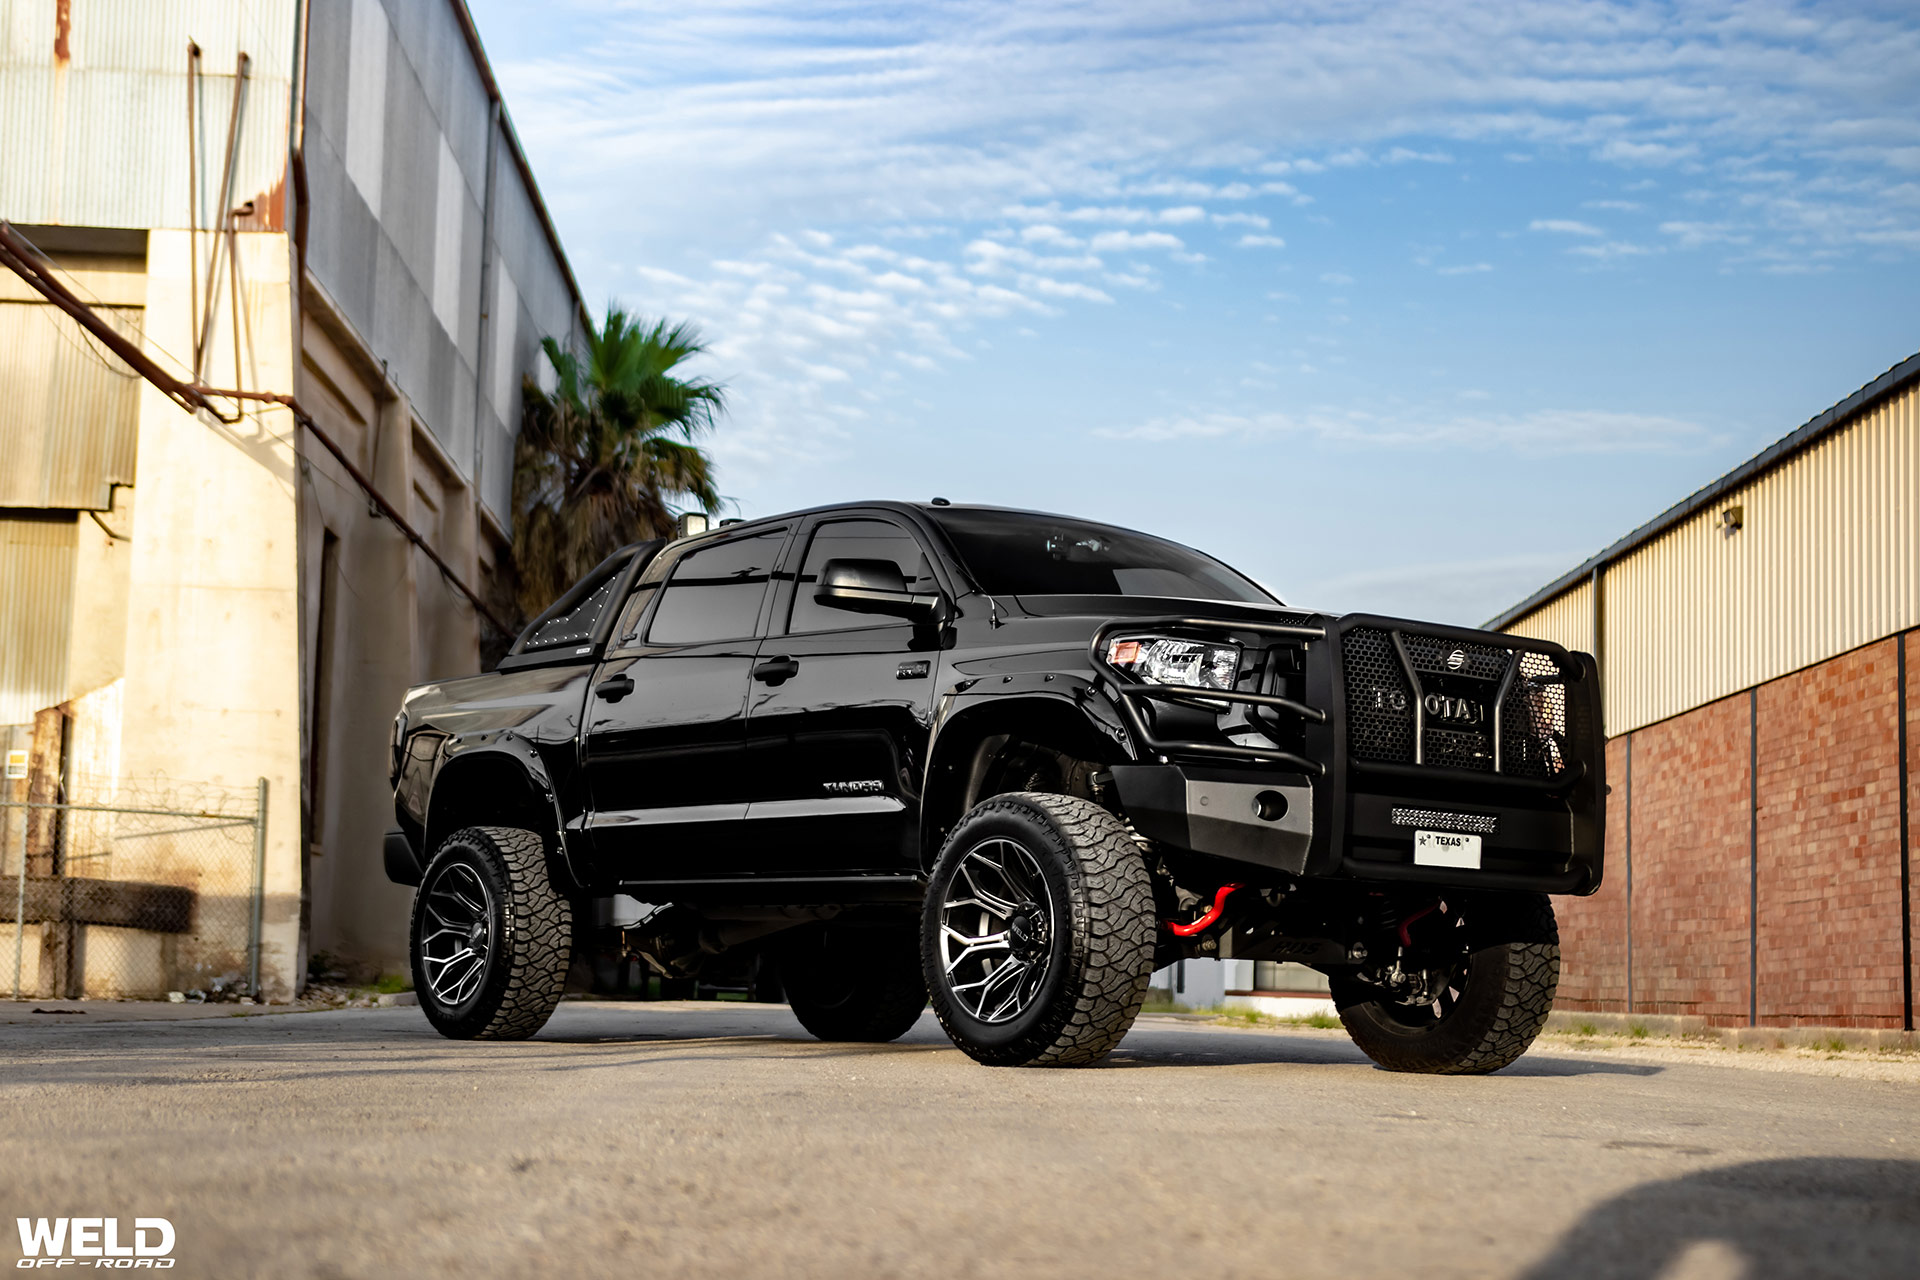 Black Toyota Tundra With Weld Off-Road Gradient | WELD Wheels